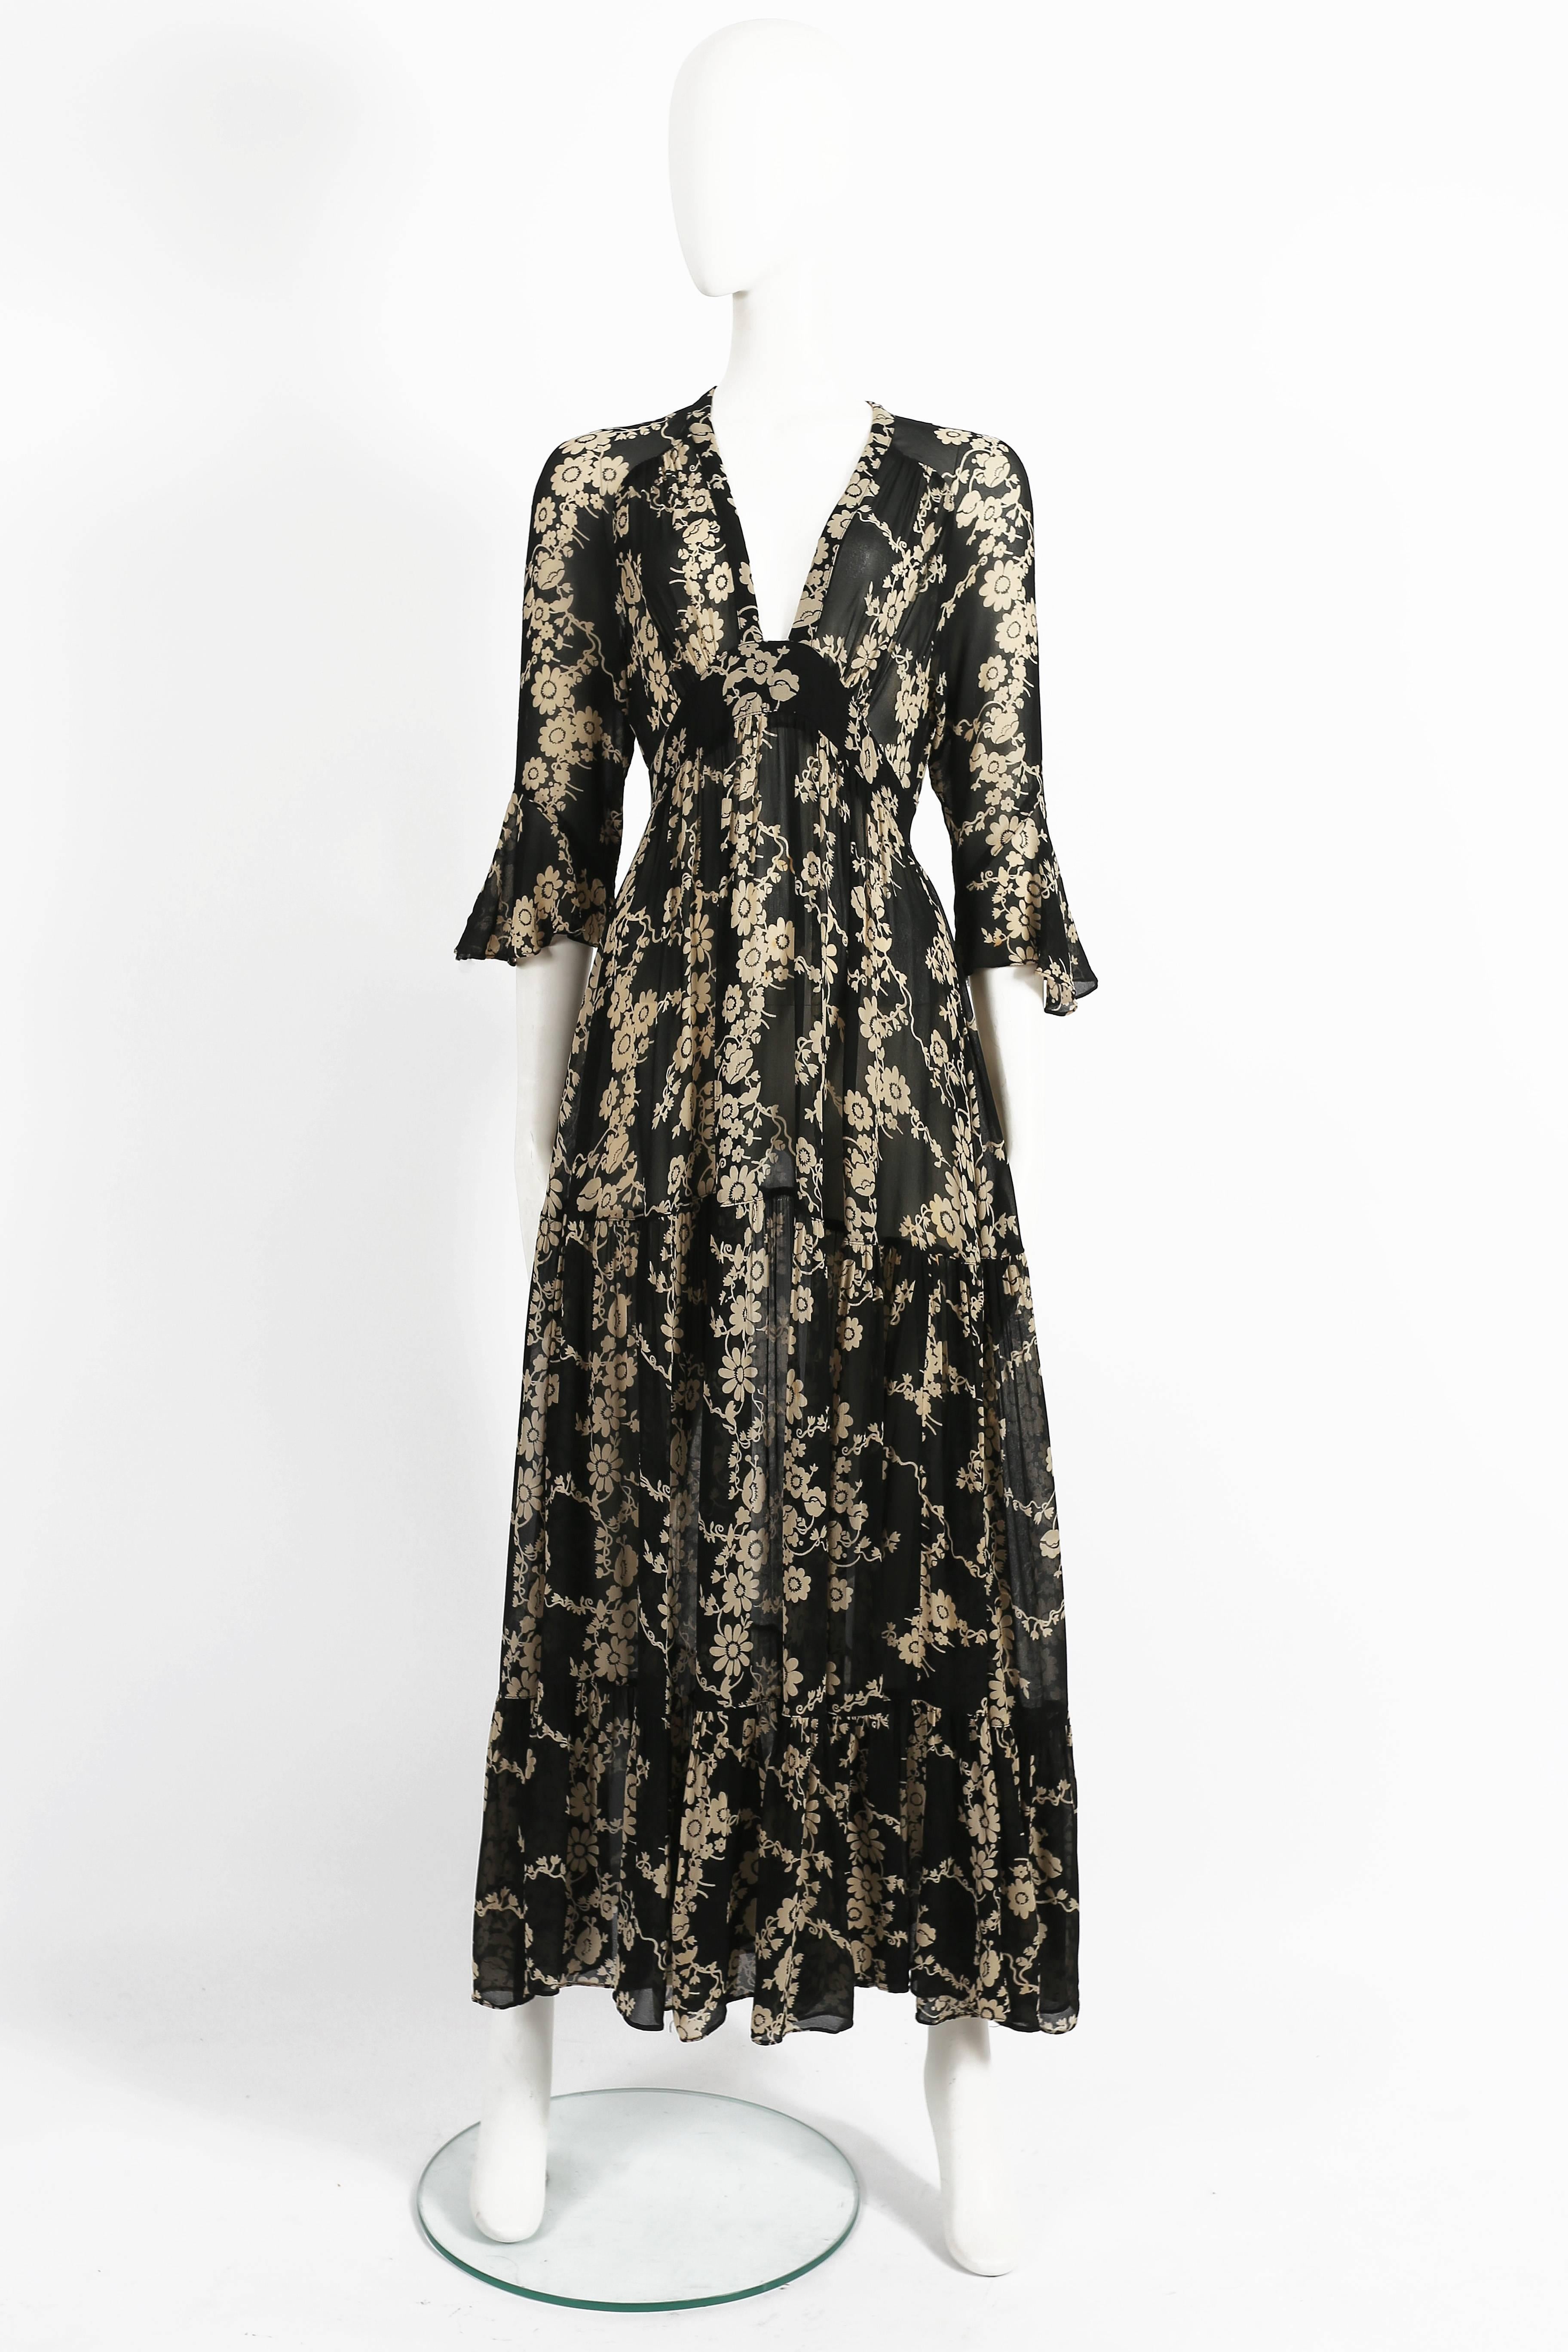 Exquisite Ossie Clark 'Soviet Rose' chiffon gown, circa 1972. The dress is constructed in a Celia Birtwell printed chiffon fabric with cream blooms on a black ground, v-neckline, front and back and ties at rear neck and the skirt falling in three